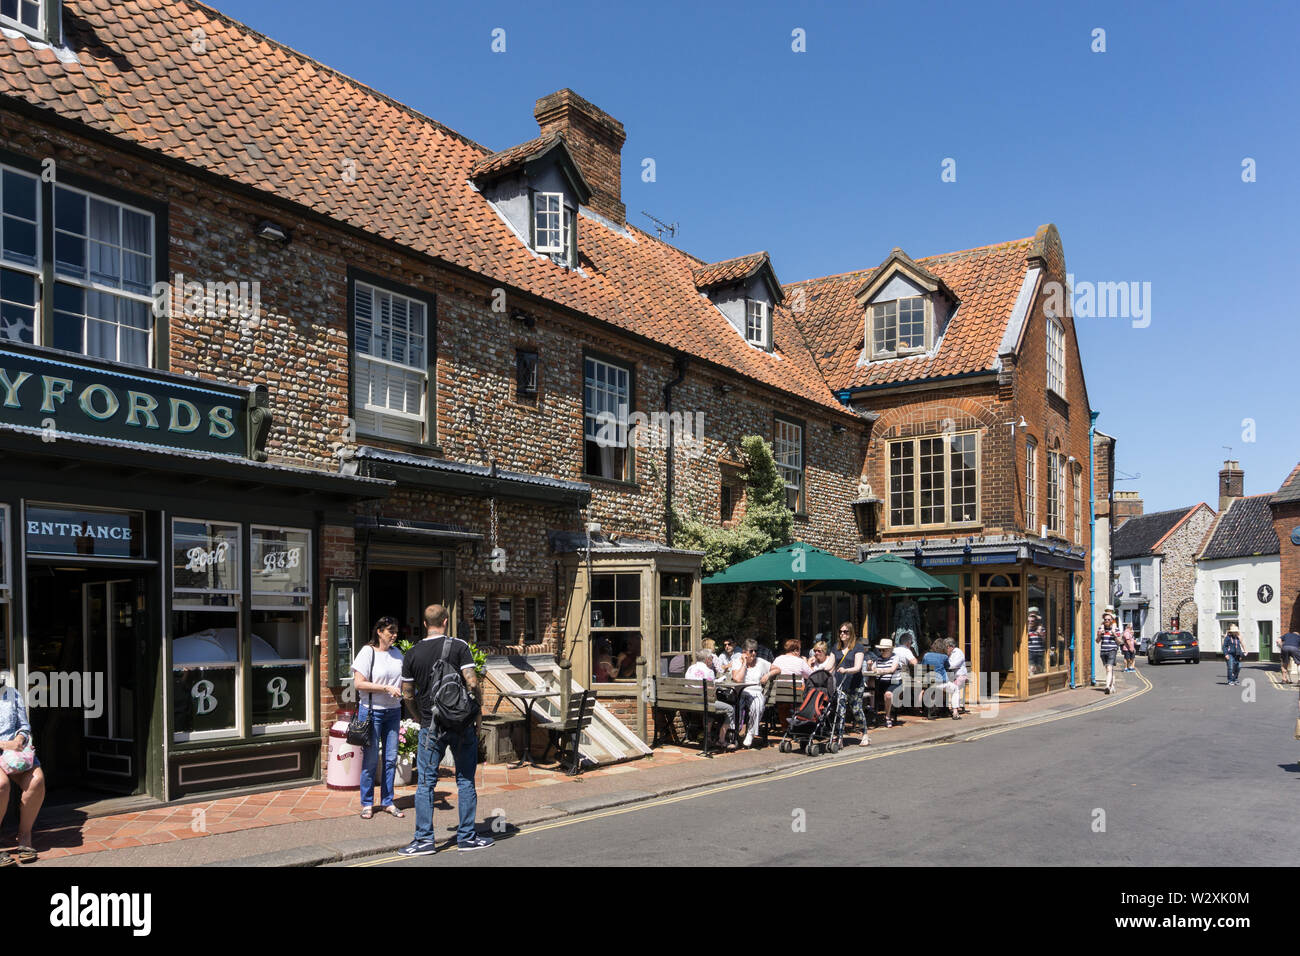 Byfords cafe, Holt, Norfolk, UK; customers sitting outside on a sunny Summer's day. Stock Photo